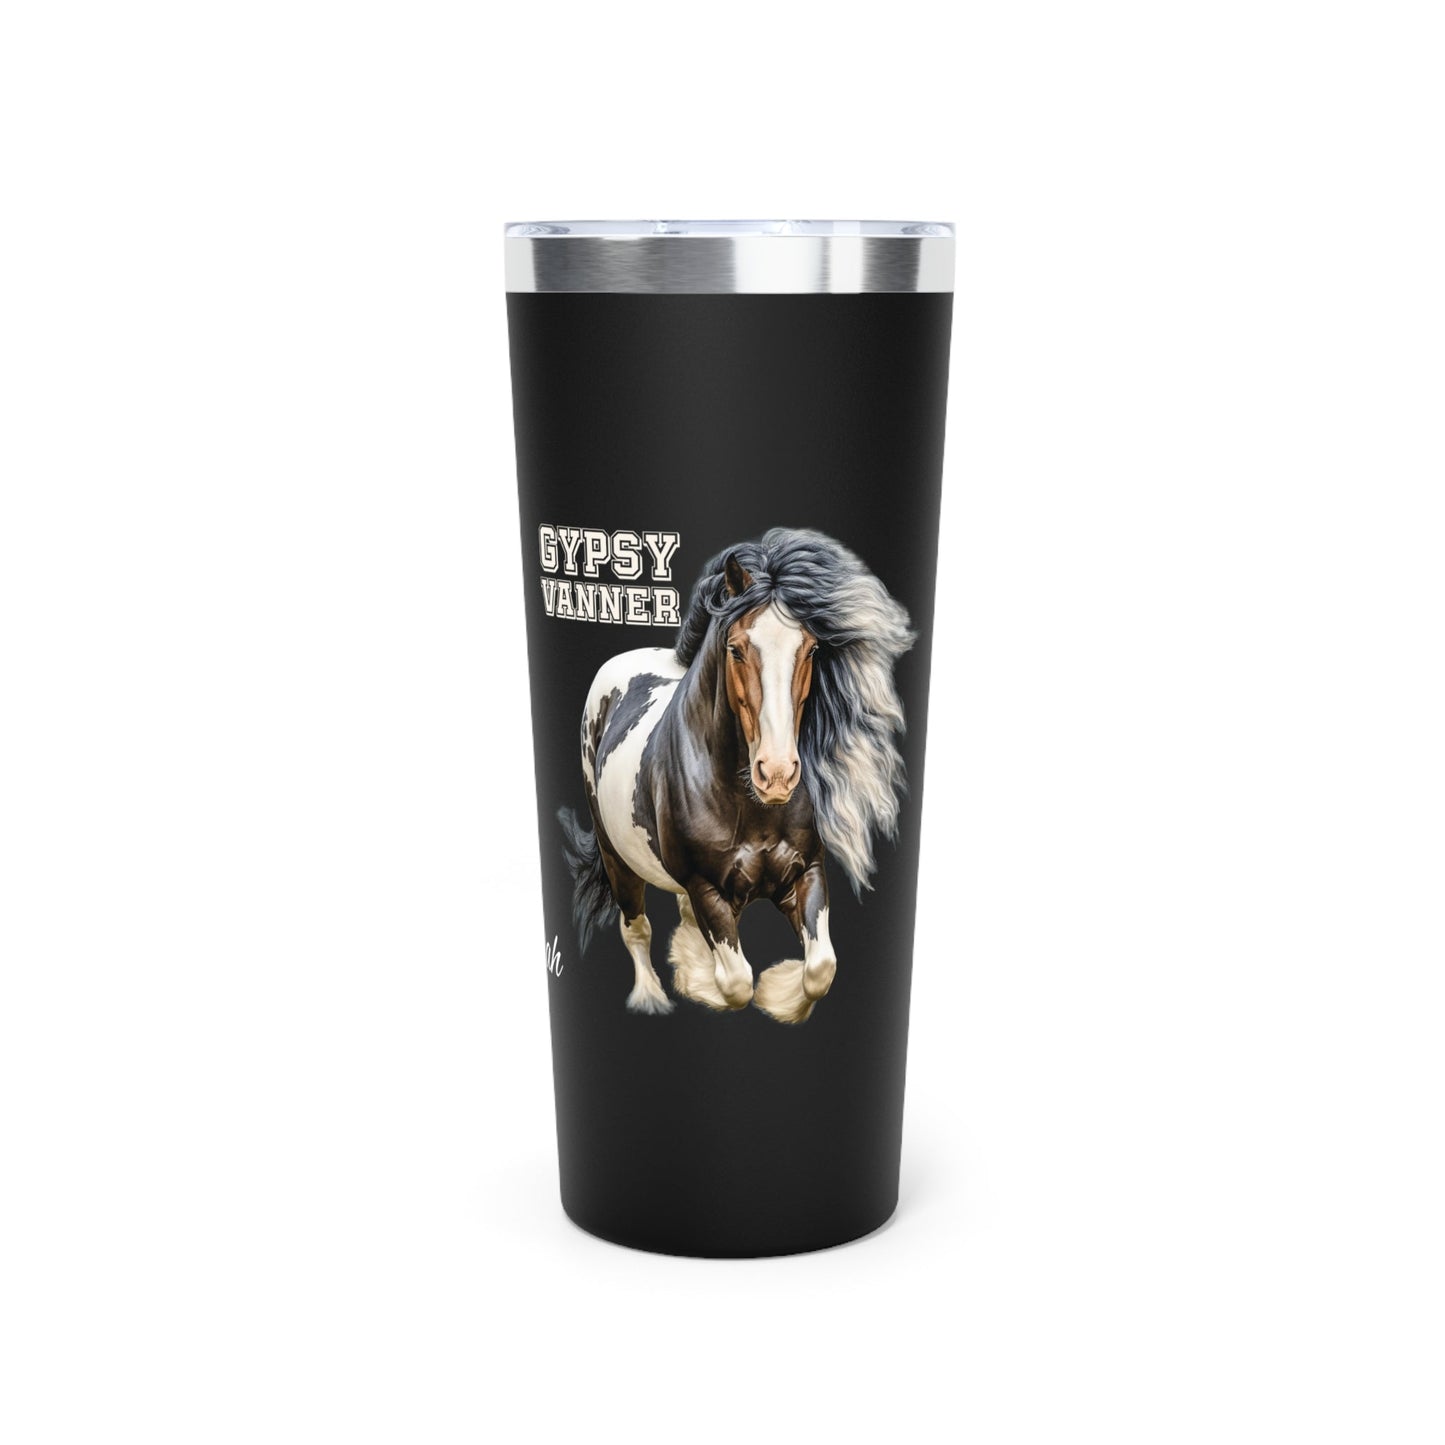 Gypsy Vanner Horse 22oz Personalized Tumbler - Beautiful Vanner Cob Horse Cup for Gypsy Horse Lover - FlooredByArt